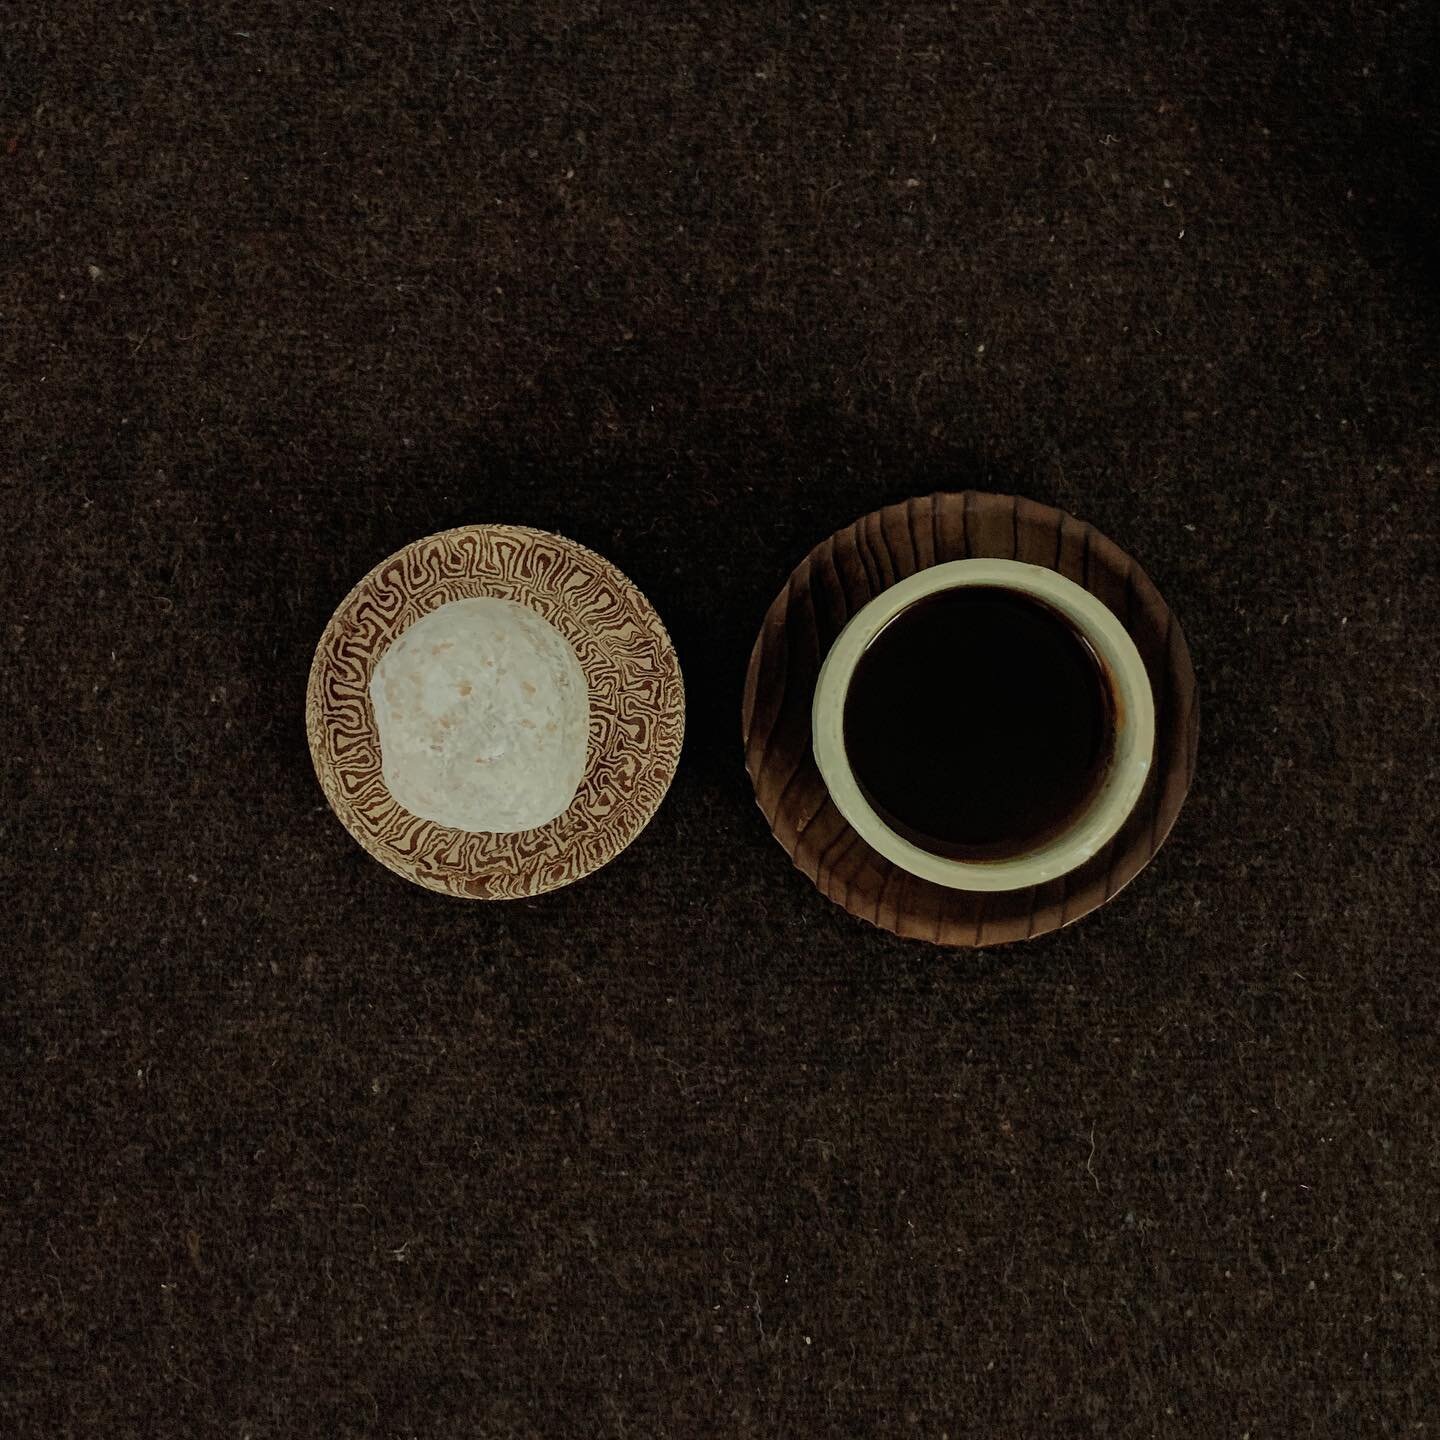 coffee break a little while ago in Tokyo, with a cup and a small plate from 8-9th century China, Tang dynasty.
⁡
いつかのコーヒーブレイク。唐時代の練り上げのうつわ(交胎盃)に、近所で買ったという胡麻餅をのせていただく。ものが超えてきた時間。手がぷるぷるしてしまうね。